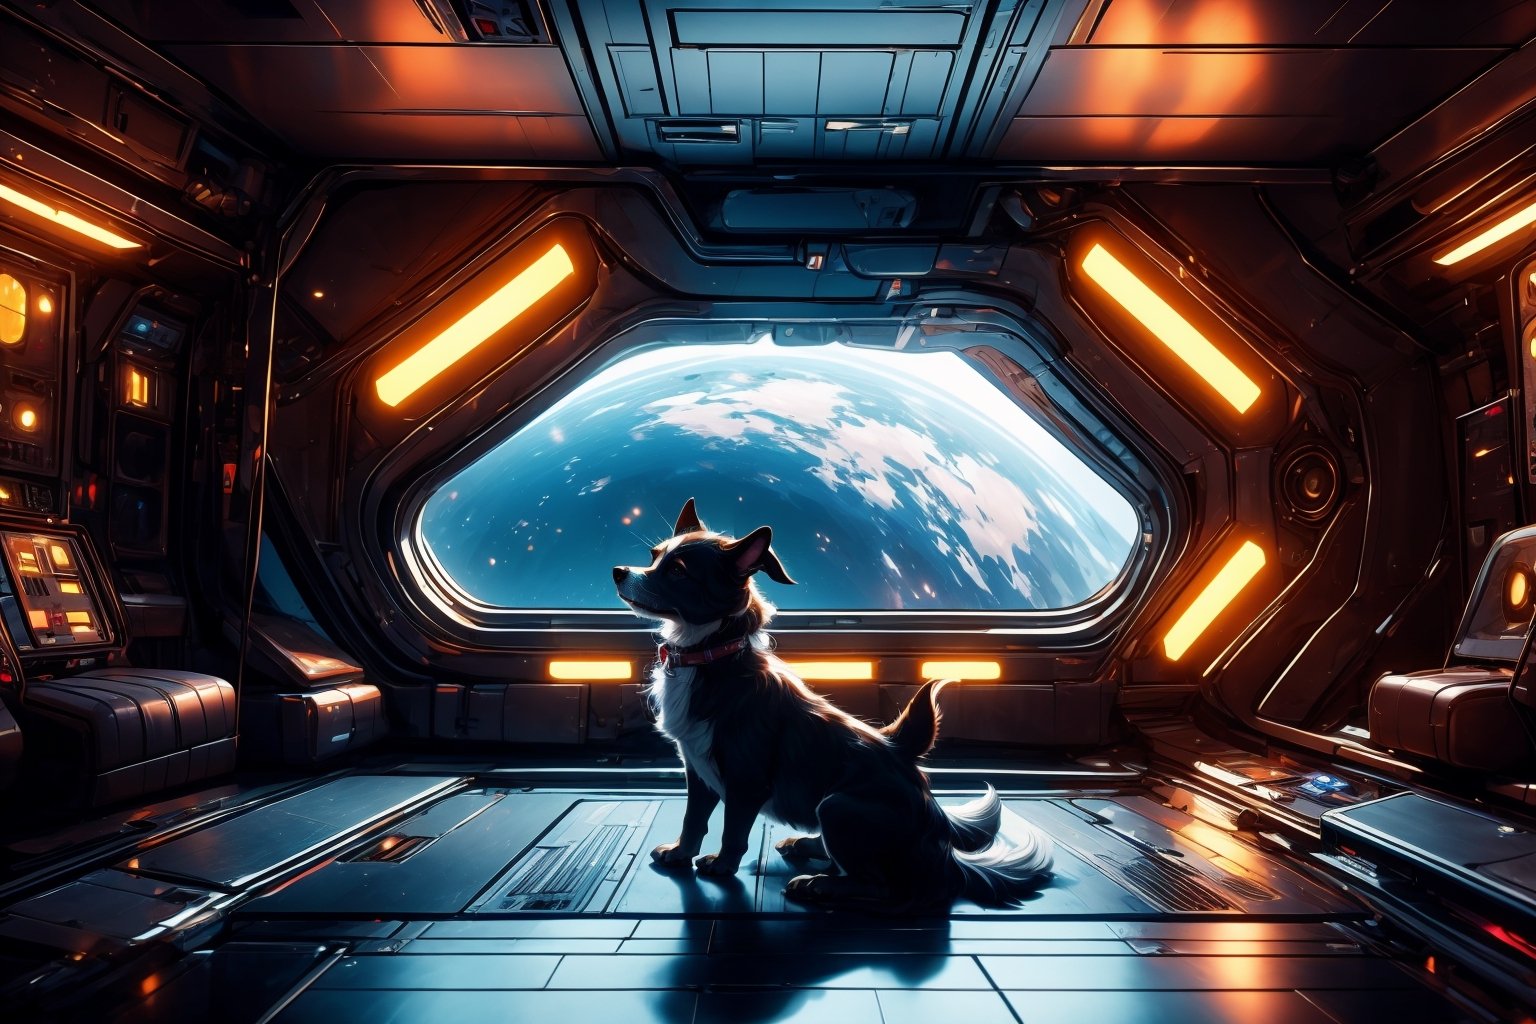 realistic, masterpiece, best quality, cute dog in astronaut suite, ultra high definition, masterpiece, best quality, astroverse, spaceship, nasa, interior of a spaceship, astronaut, astronaut dog, cosmo, space,Futuristic room,3d